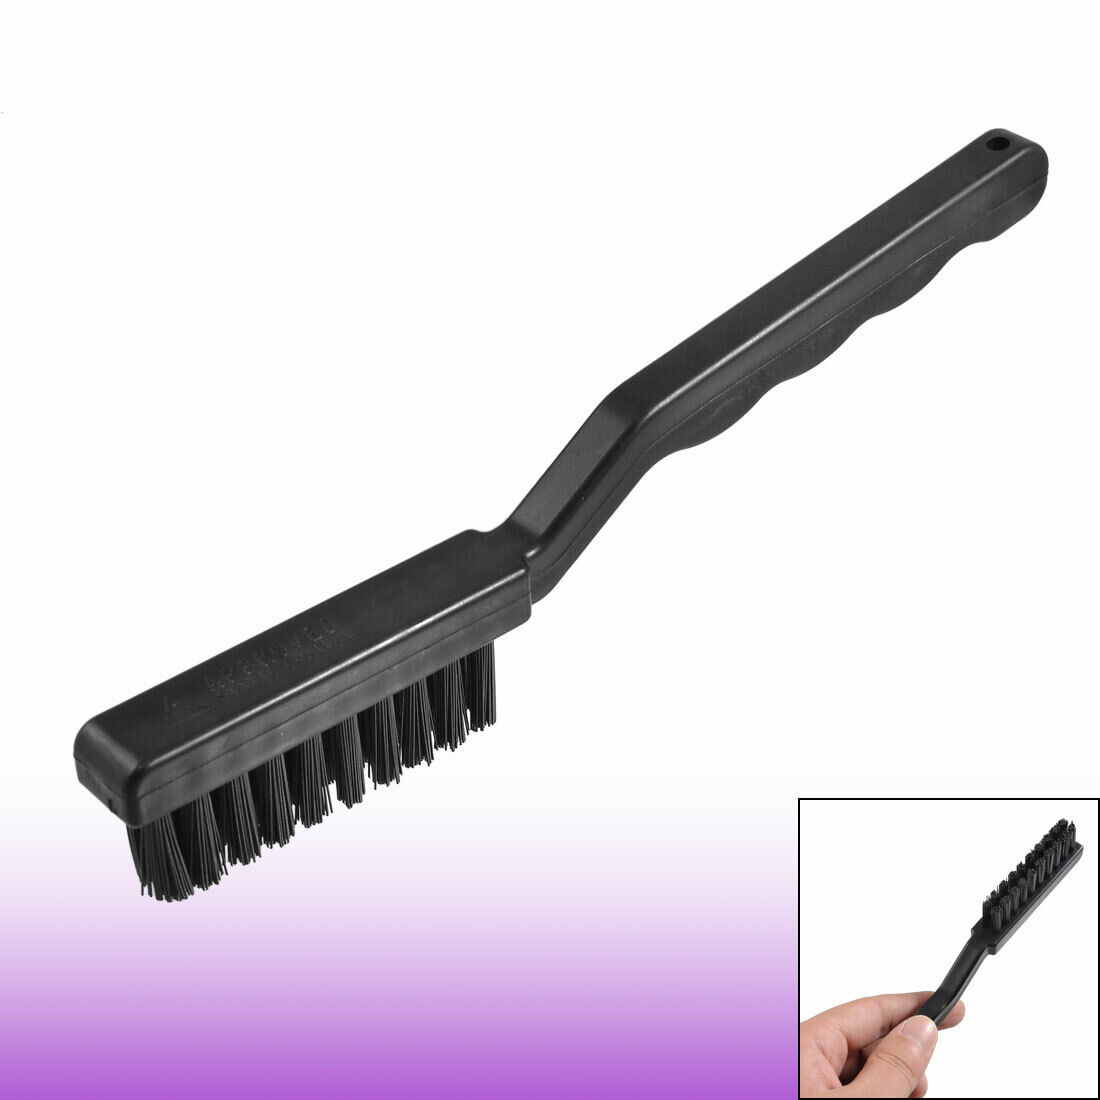 PCB Dust Clean Toothbrush Style Ground Conductive Anti Static ESD Brush